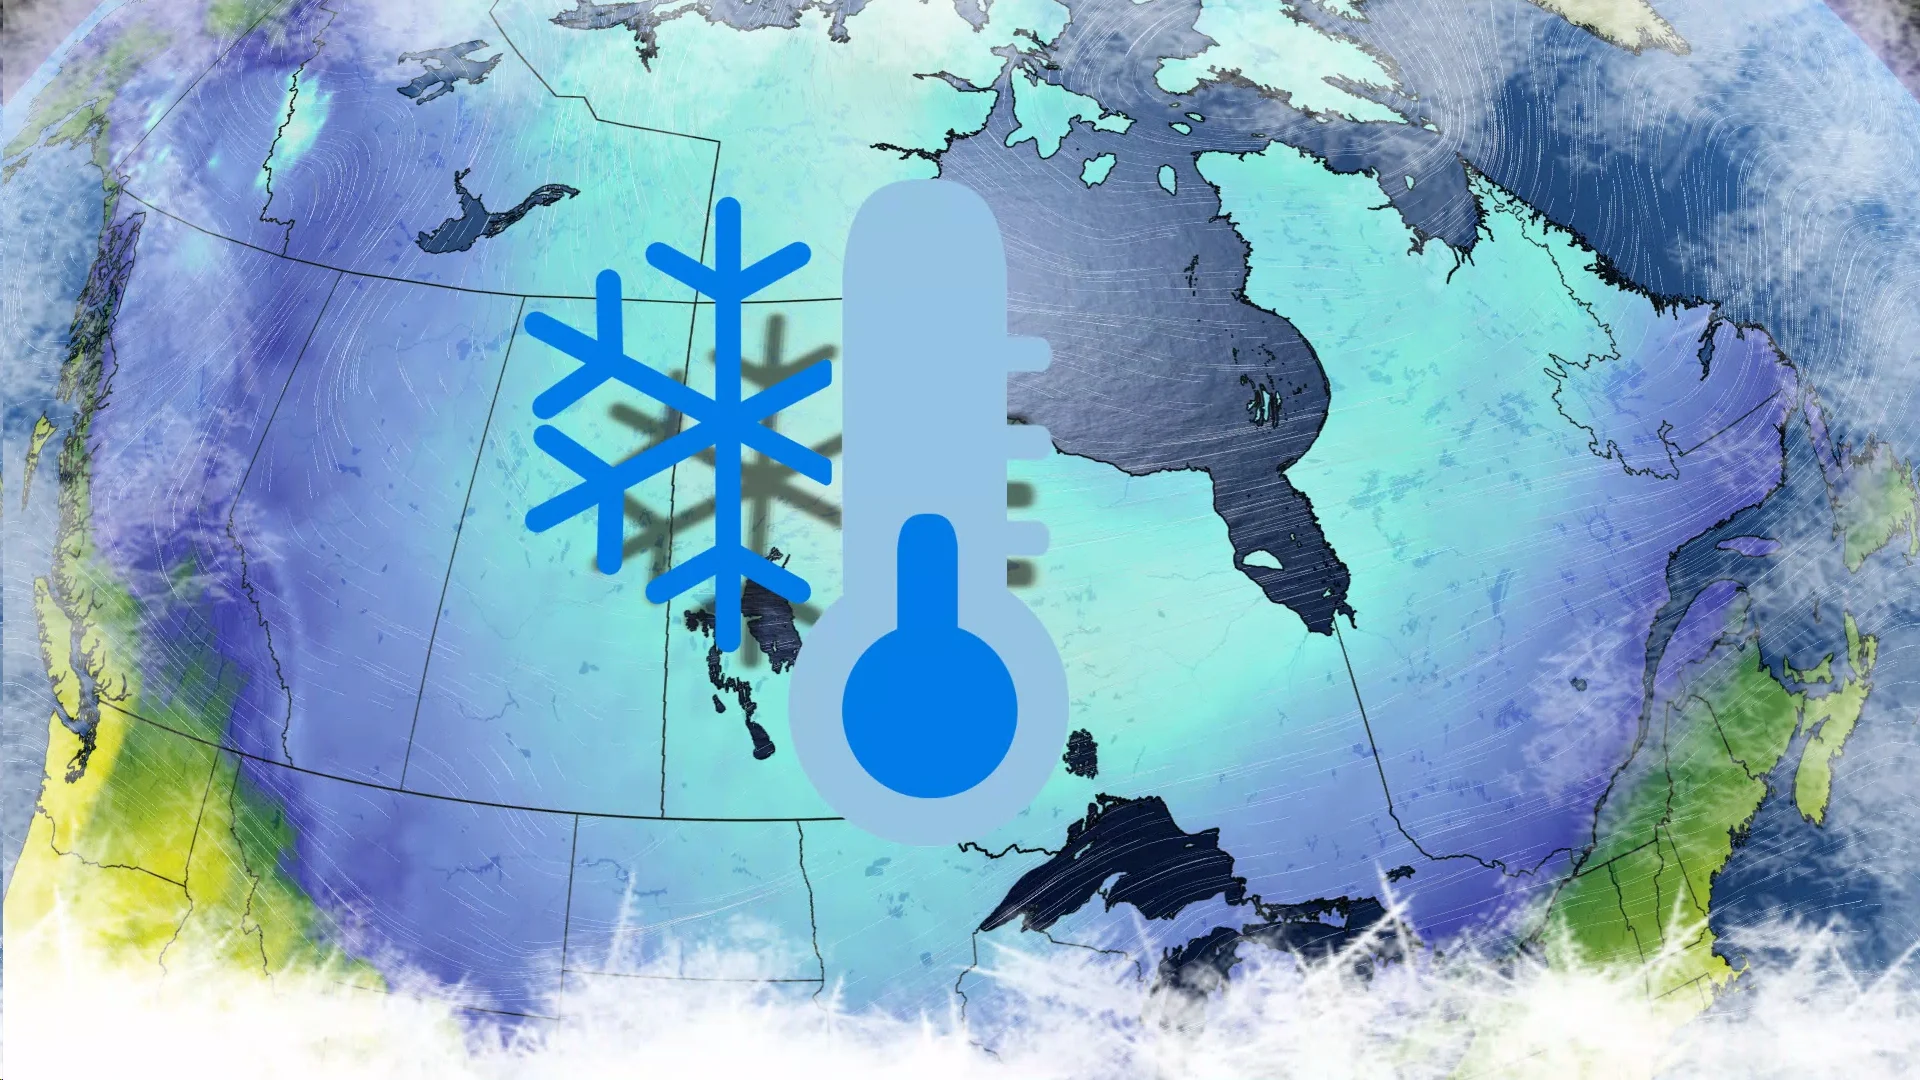 Canada's first fall -30°C temperature reached, a sign of what's to come?